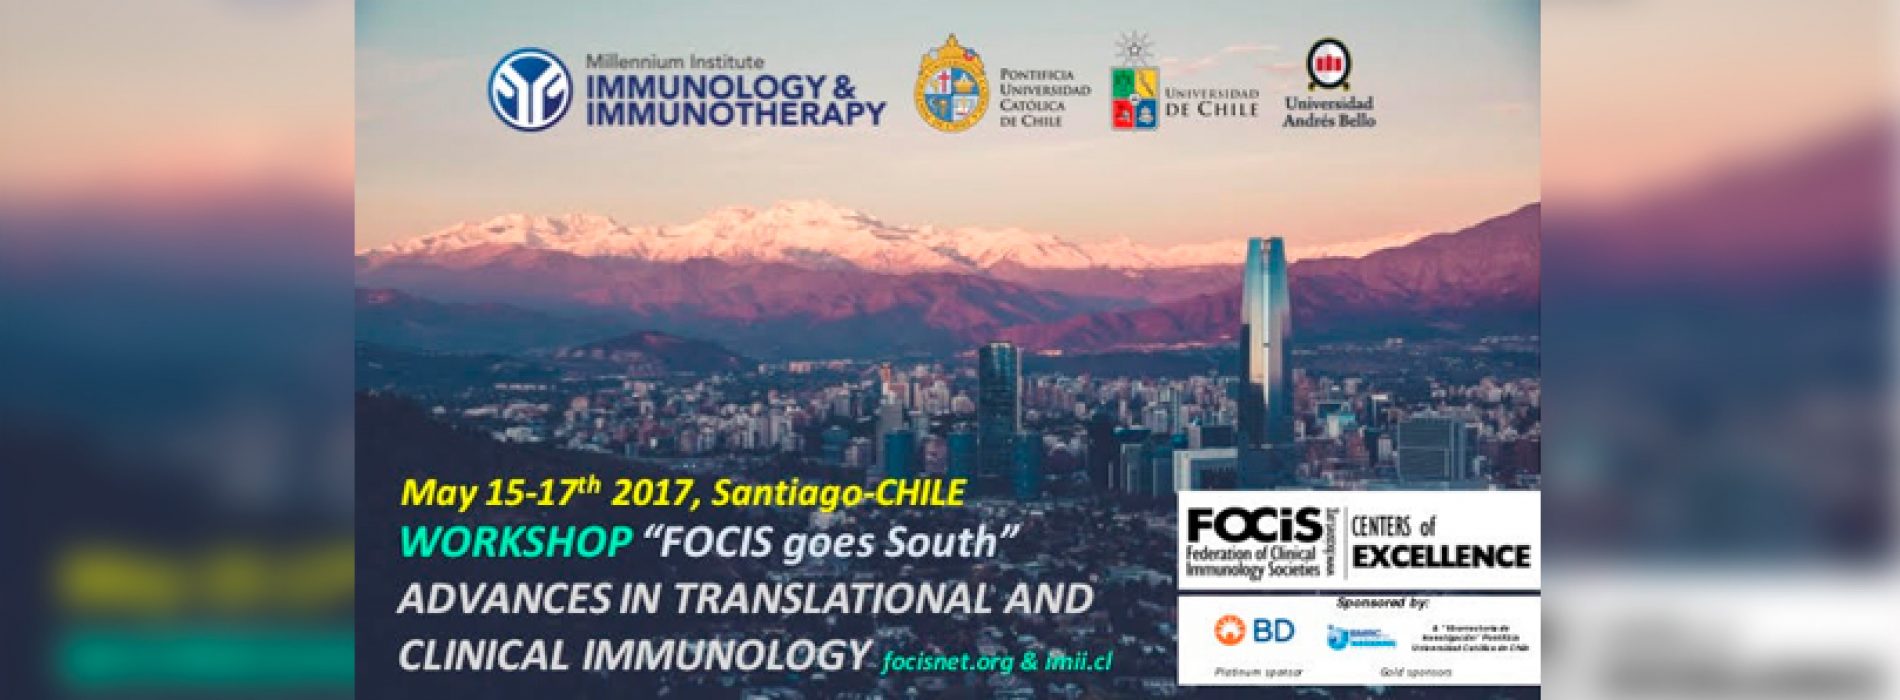 FOCIS goes South: ADVANCES IN TRANSLATIONAL AND CLINICAL IMMUNOLOGY